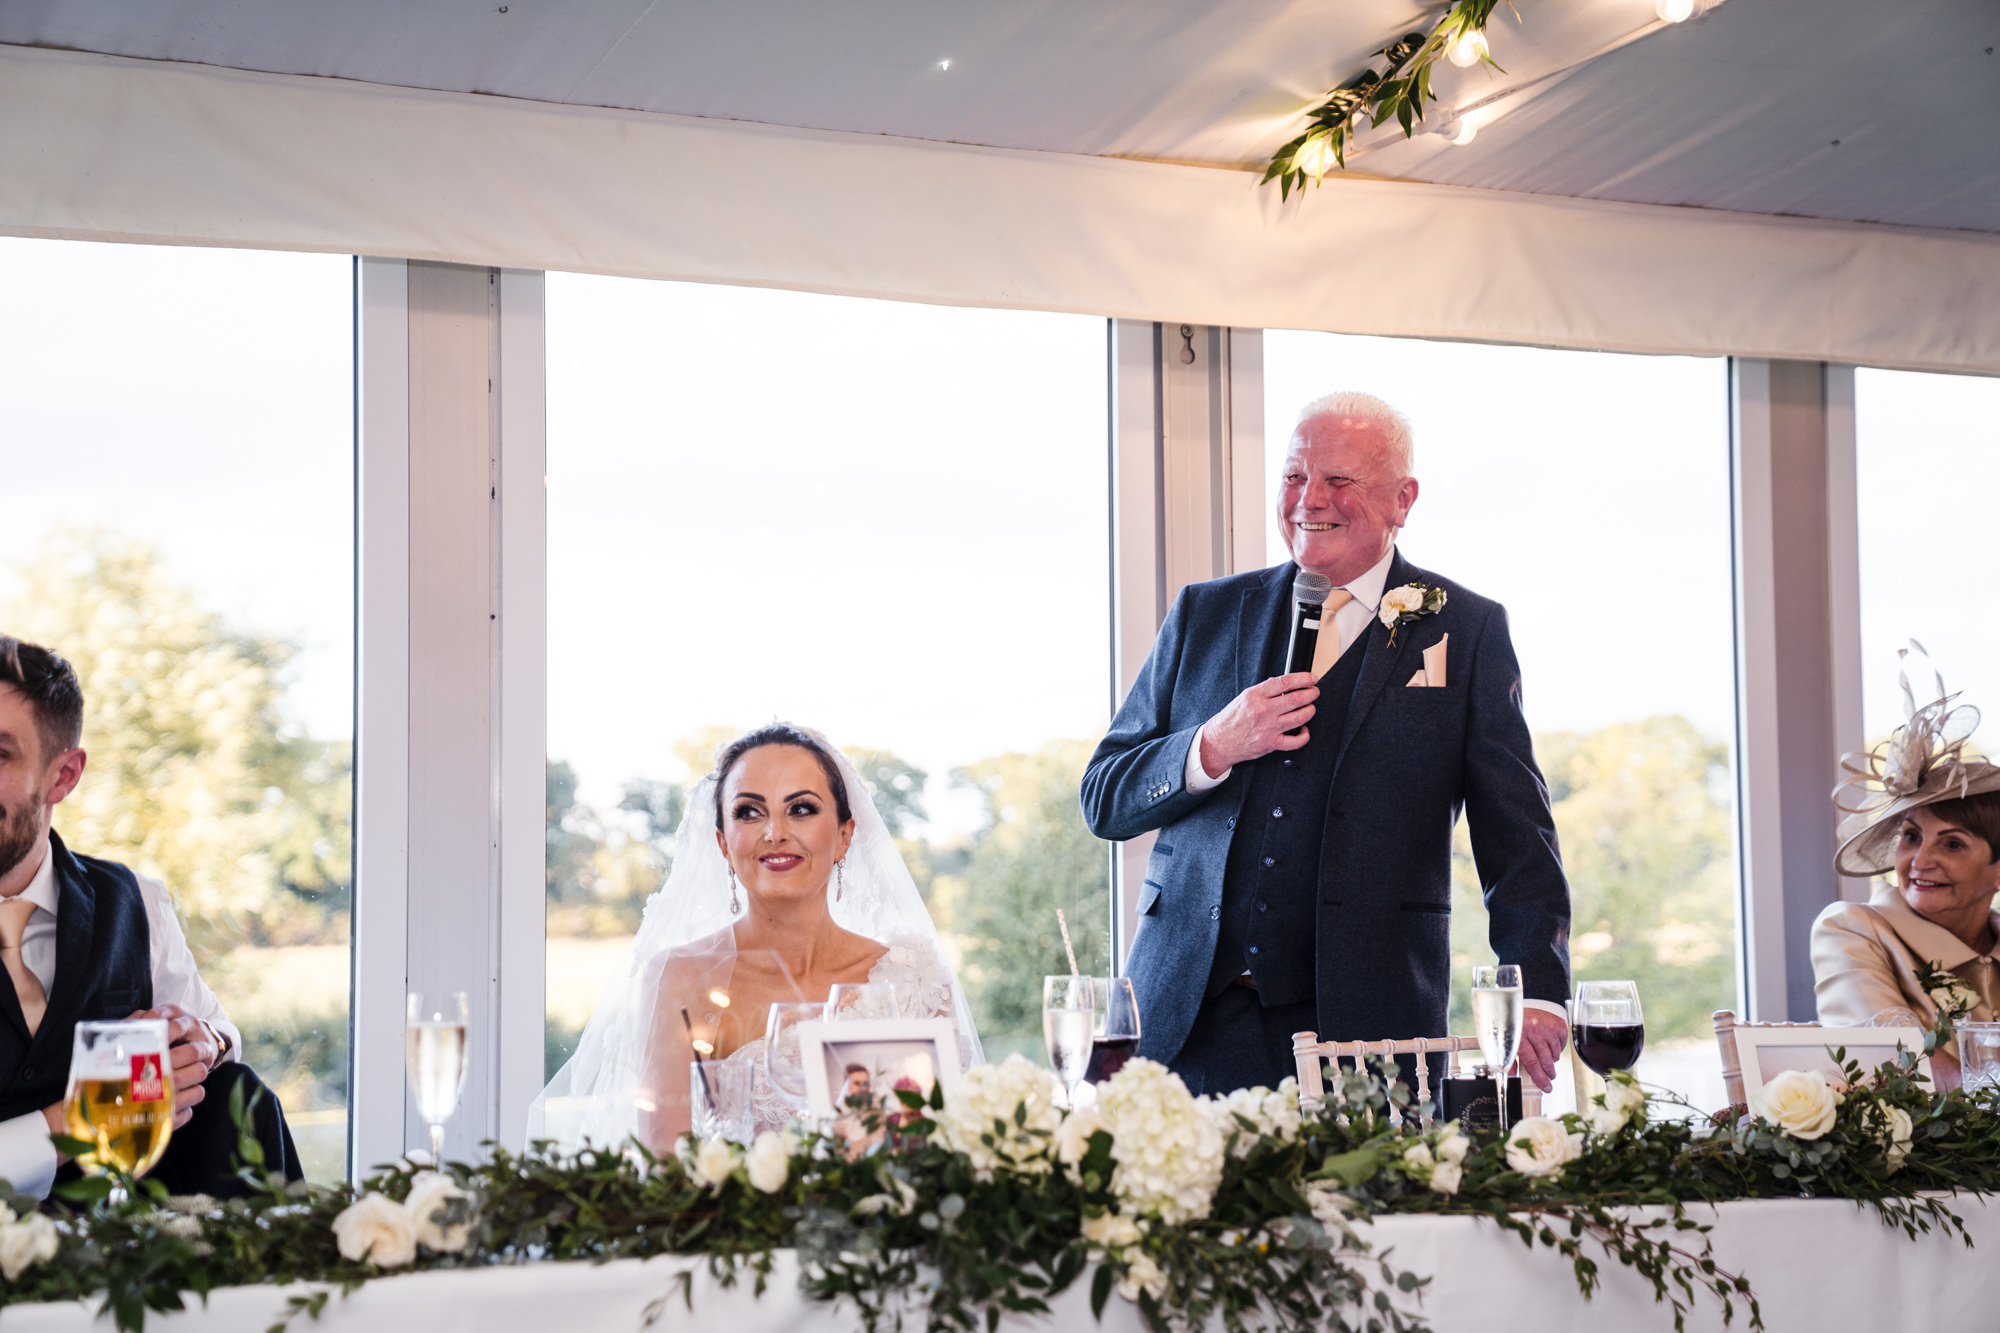 father of the bride giving a speech at wedding while bride smiles